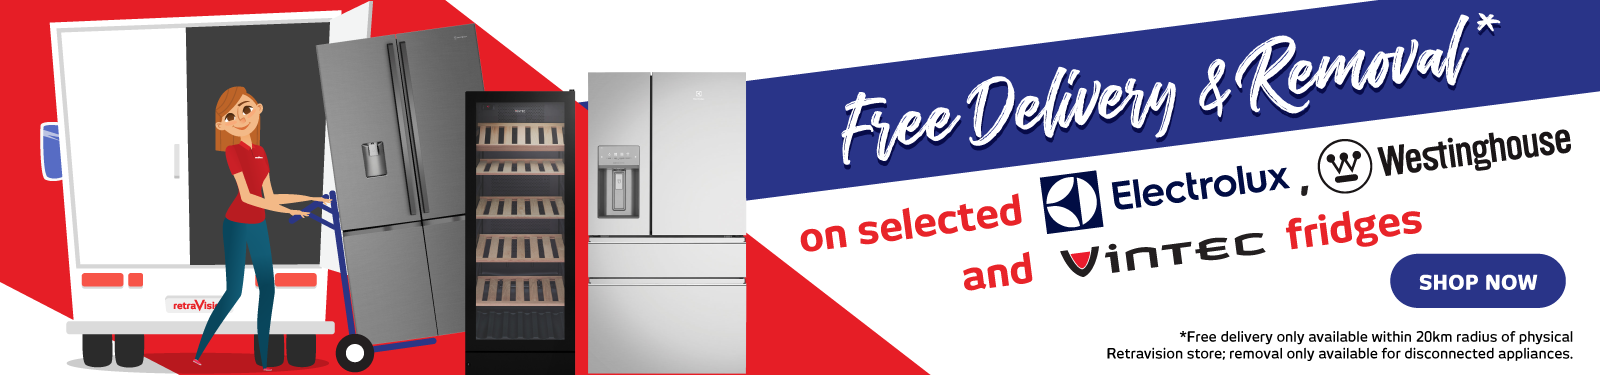 Free Delivery & Removal With Selected Electrolux, Westinghouse & Vintec Fridges